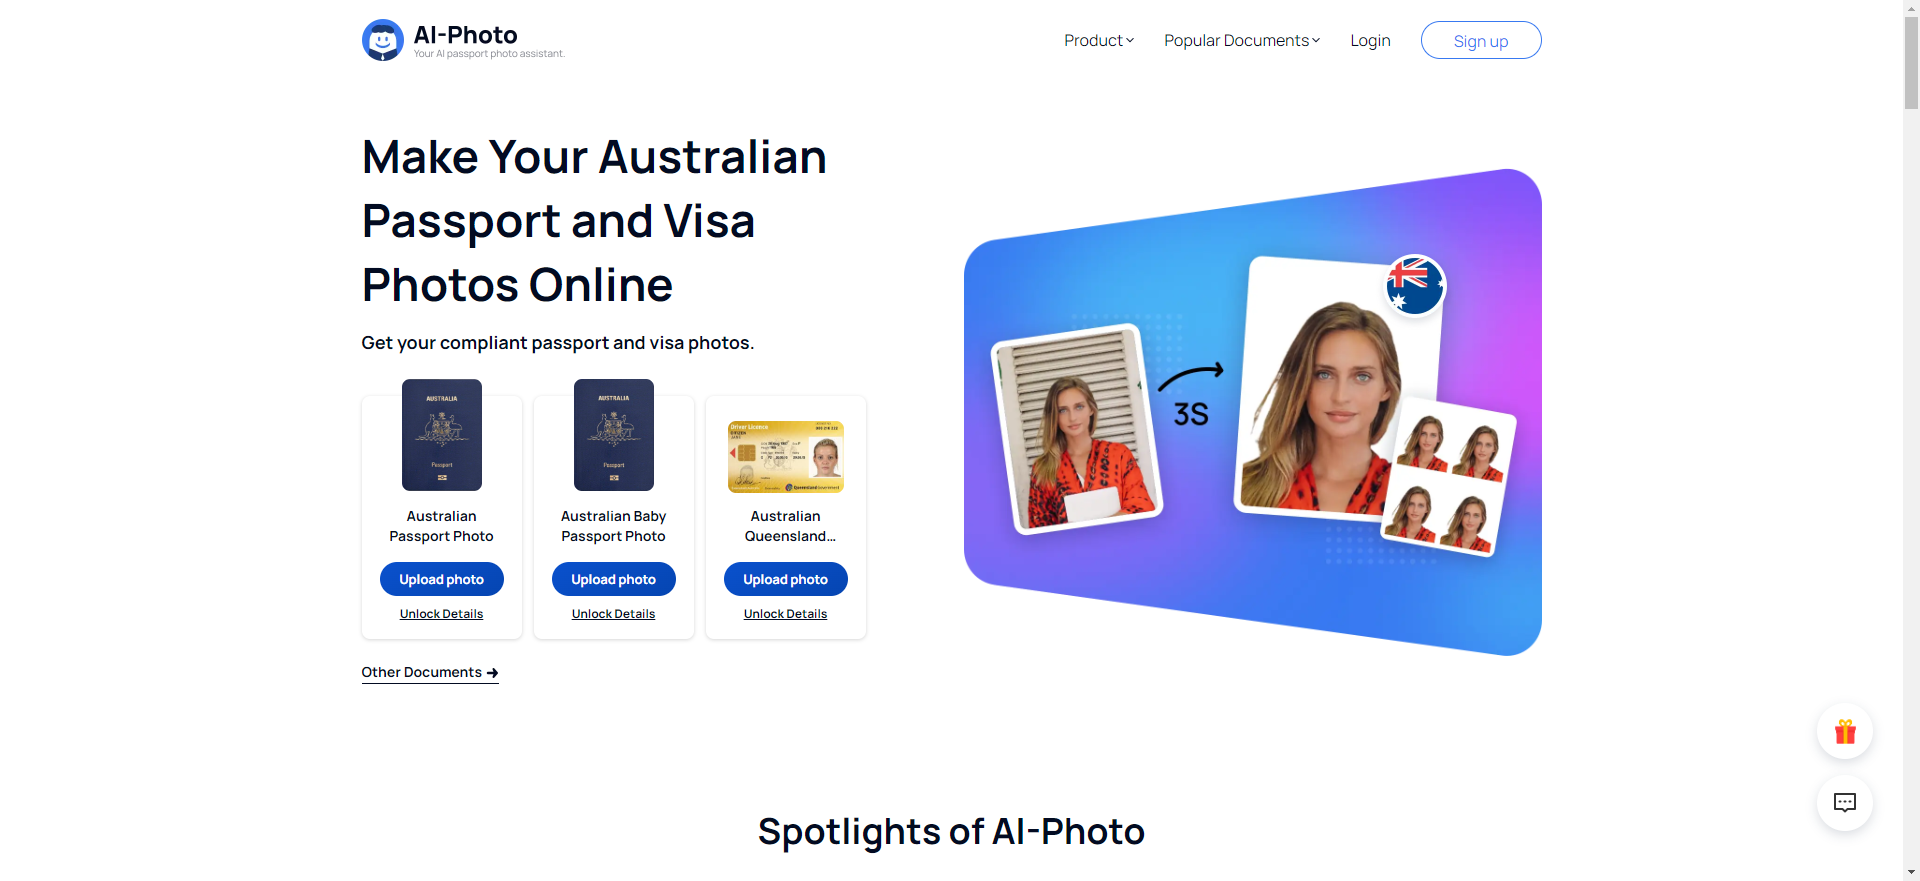 No matter where you come from, you could find the perfect passport photo option here.